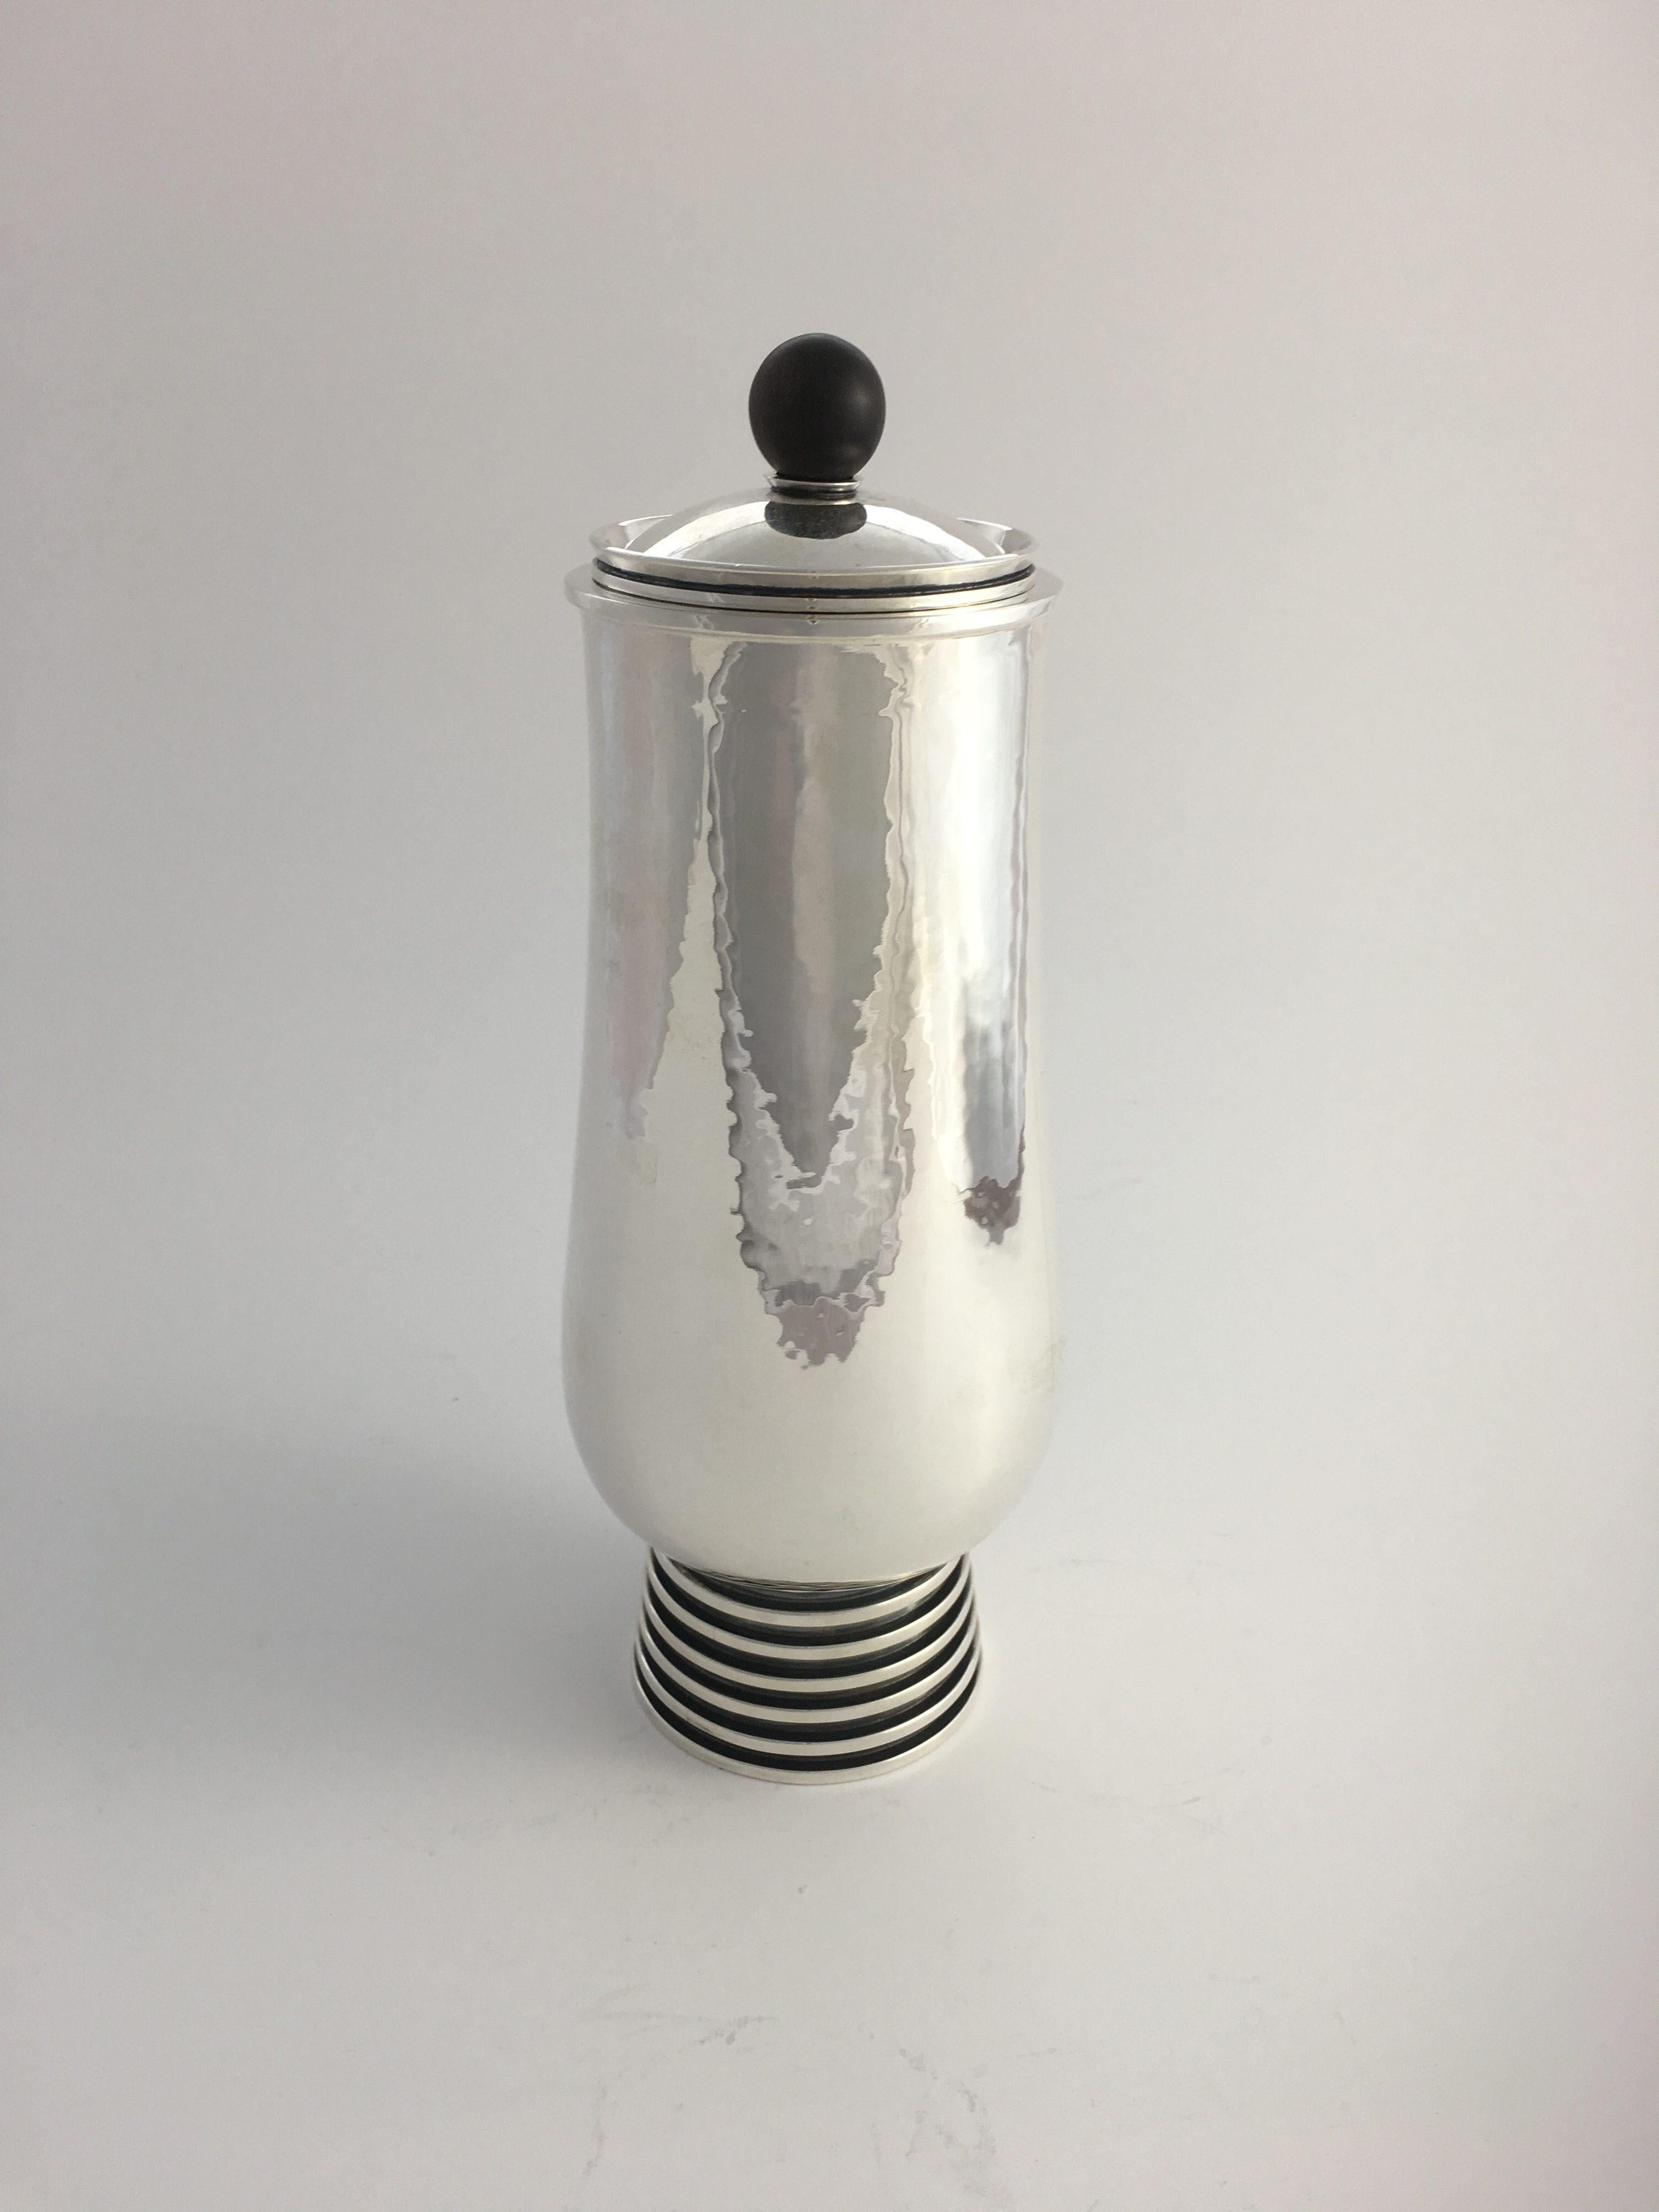 Vintage sterling silver Hans Hansen Art Deco lidded cannister with ebony finial, design #200 from 1934 by Karl Gustav Hansen.
Measures 9 1/4? in height (23.5cm). Gross weight 18.5oz (525g).
Vintage Hans Hansen hallmark and date stamp for